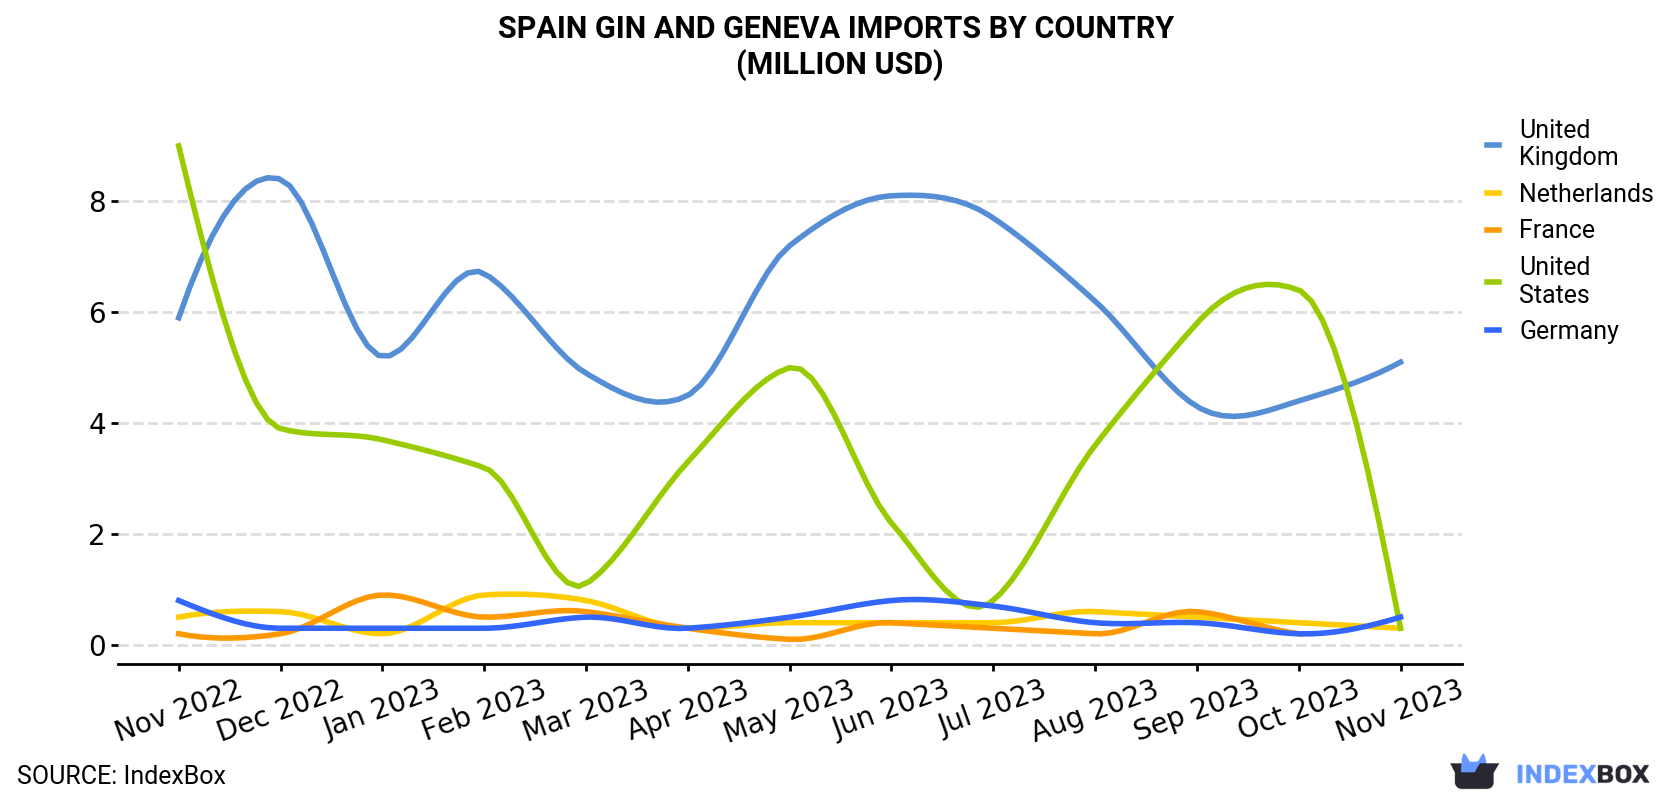 Spain Gin And Geneva Imports By Country (Million USD)